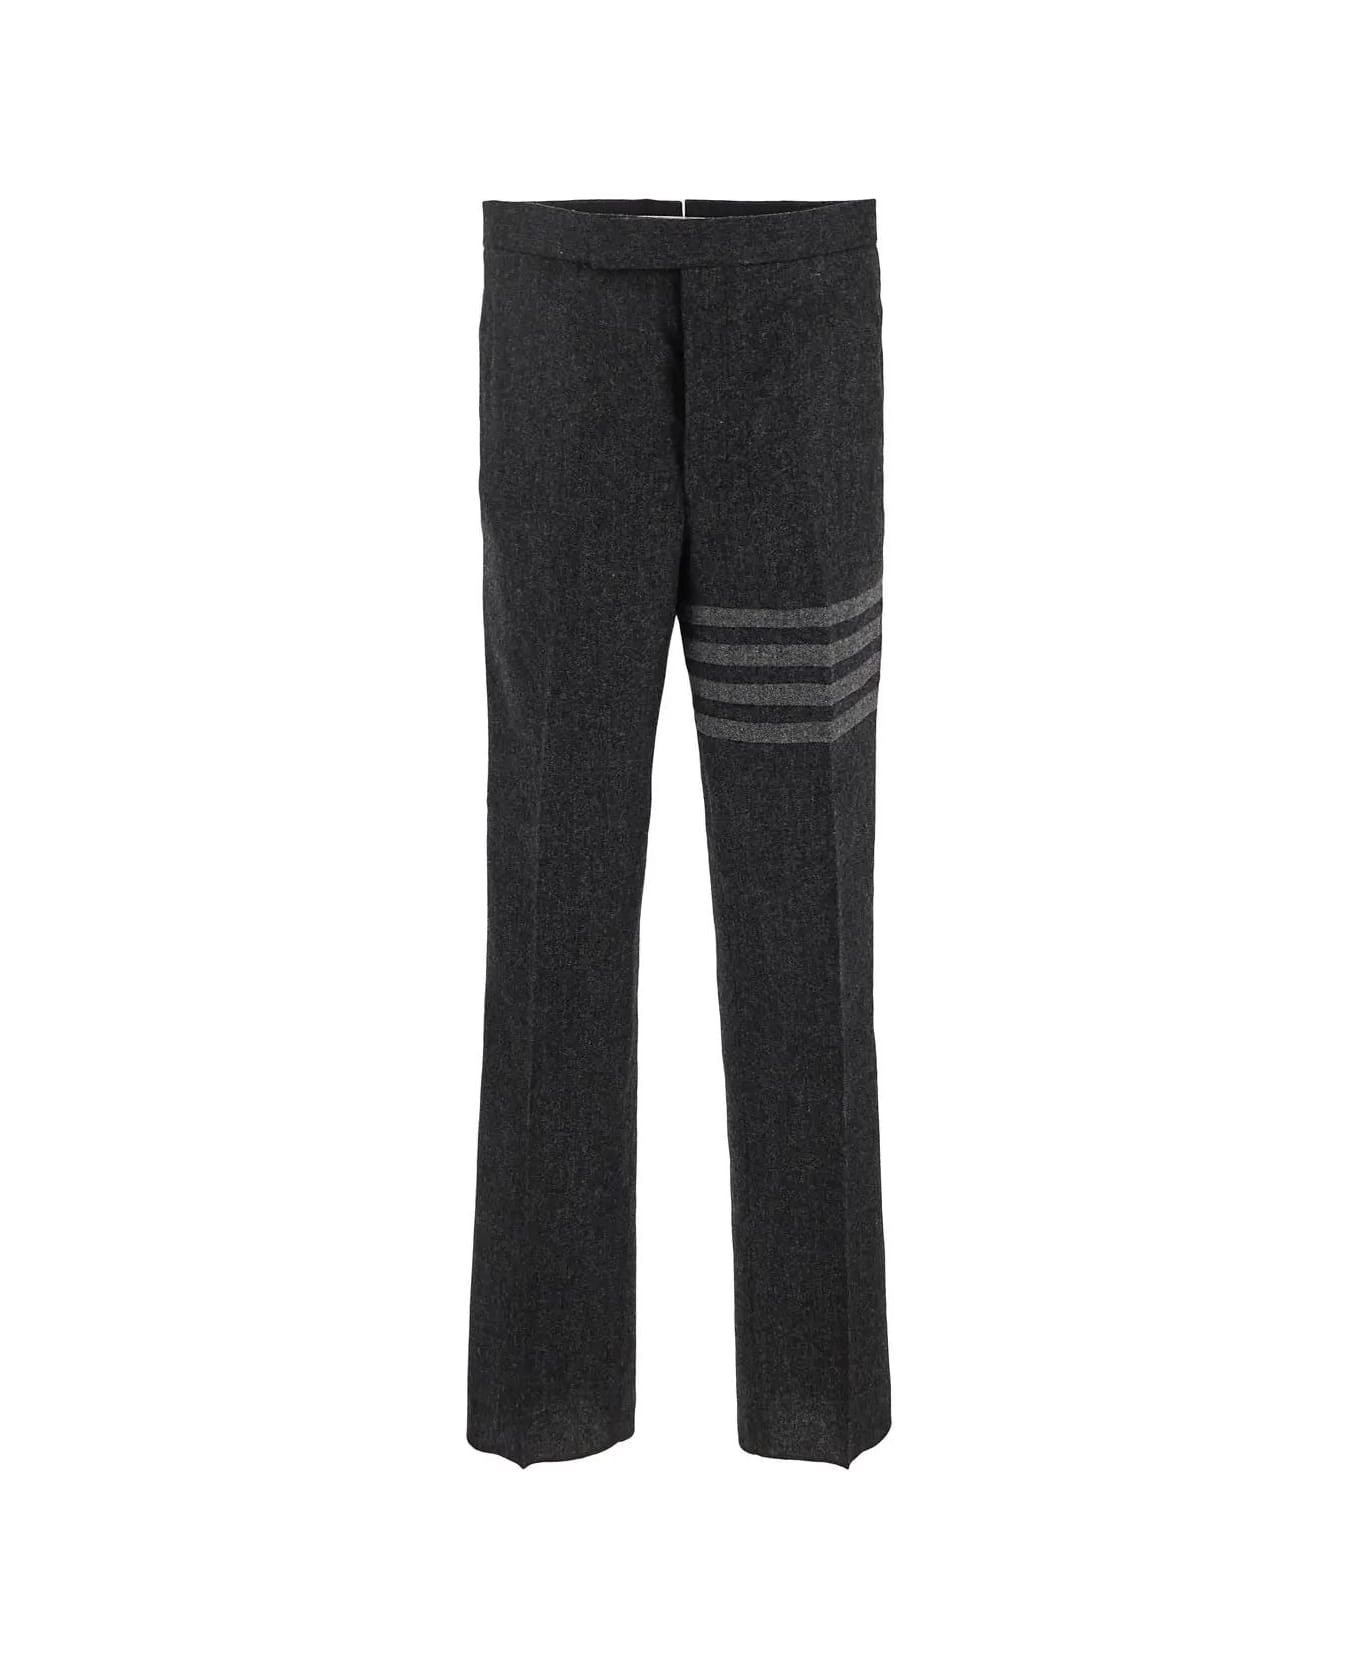 Thom Browne Low Rise Trousers - GREY